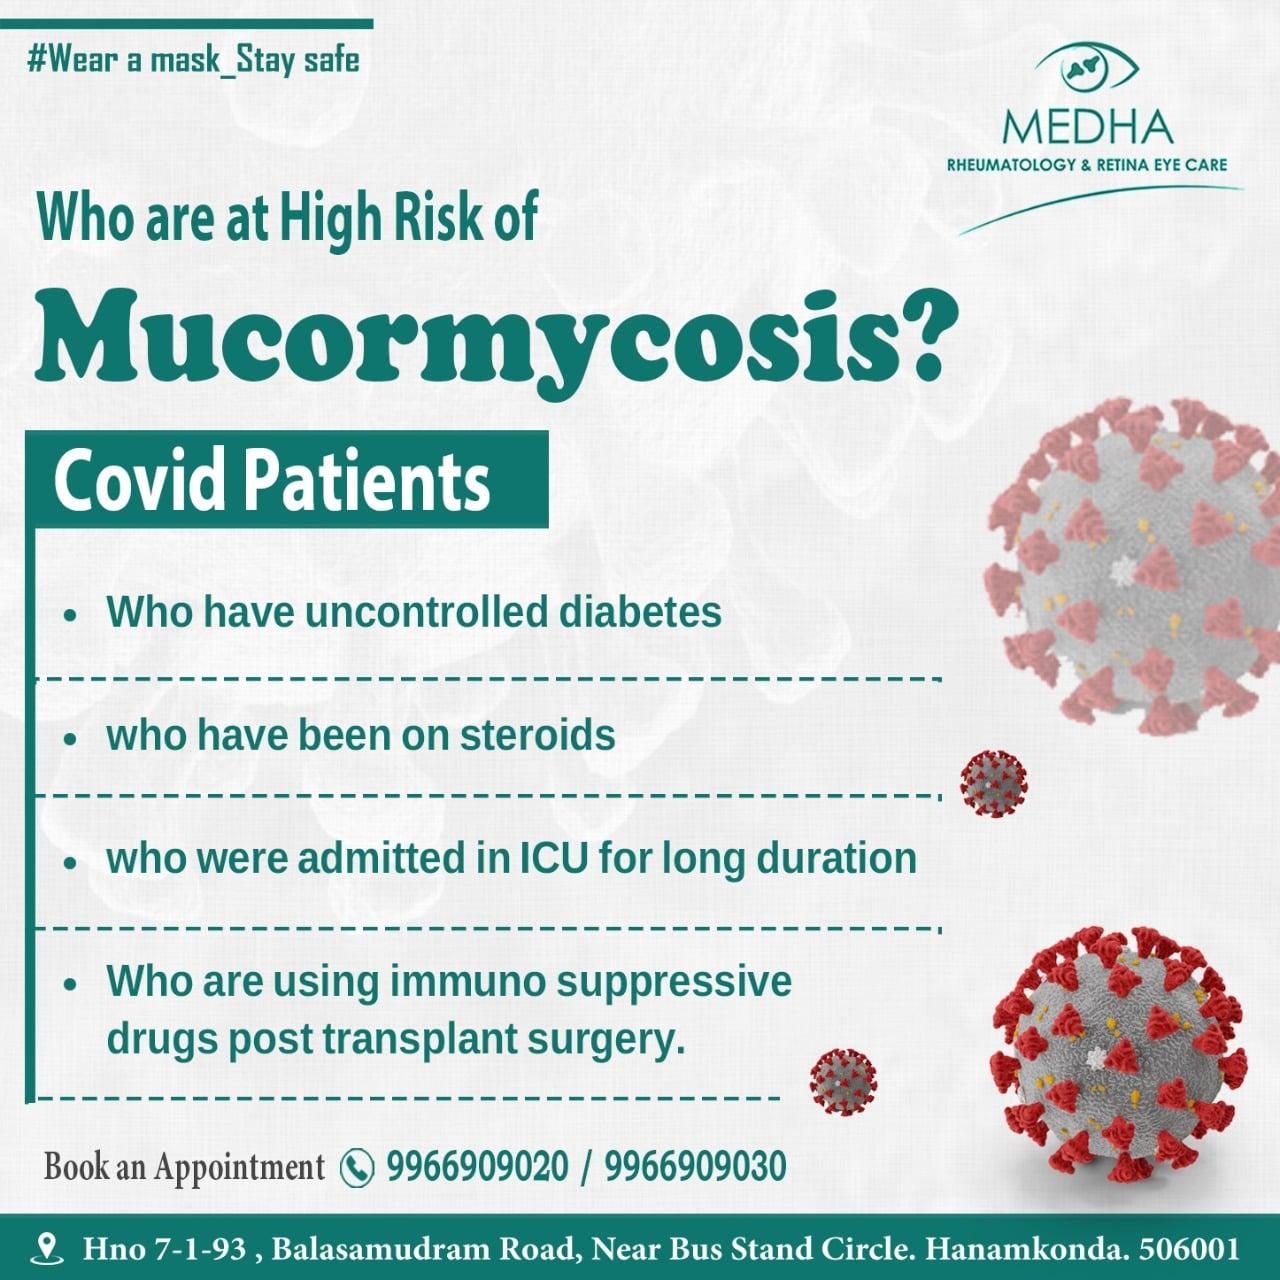 Who are at high risk of mucormycosis?